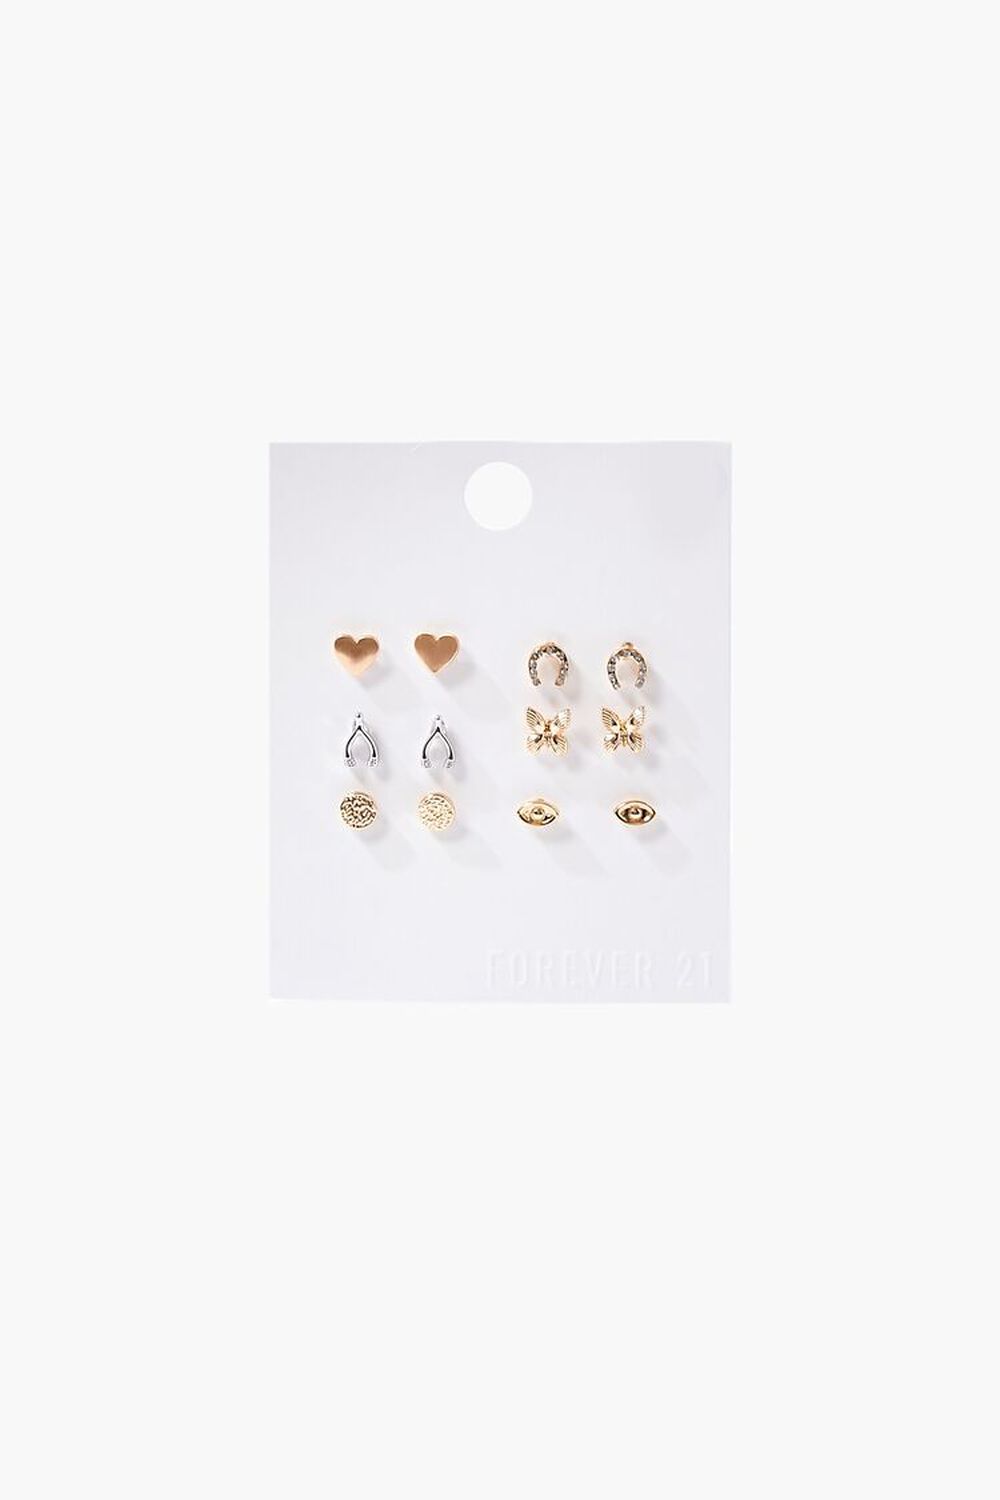 GOLD/SILVER Variety Stud Charm Earring Set, image 1